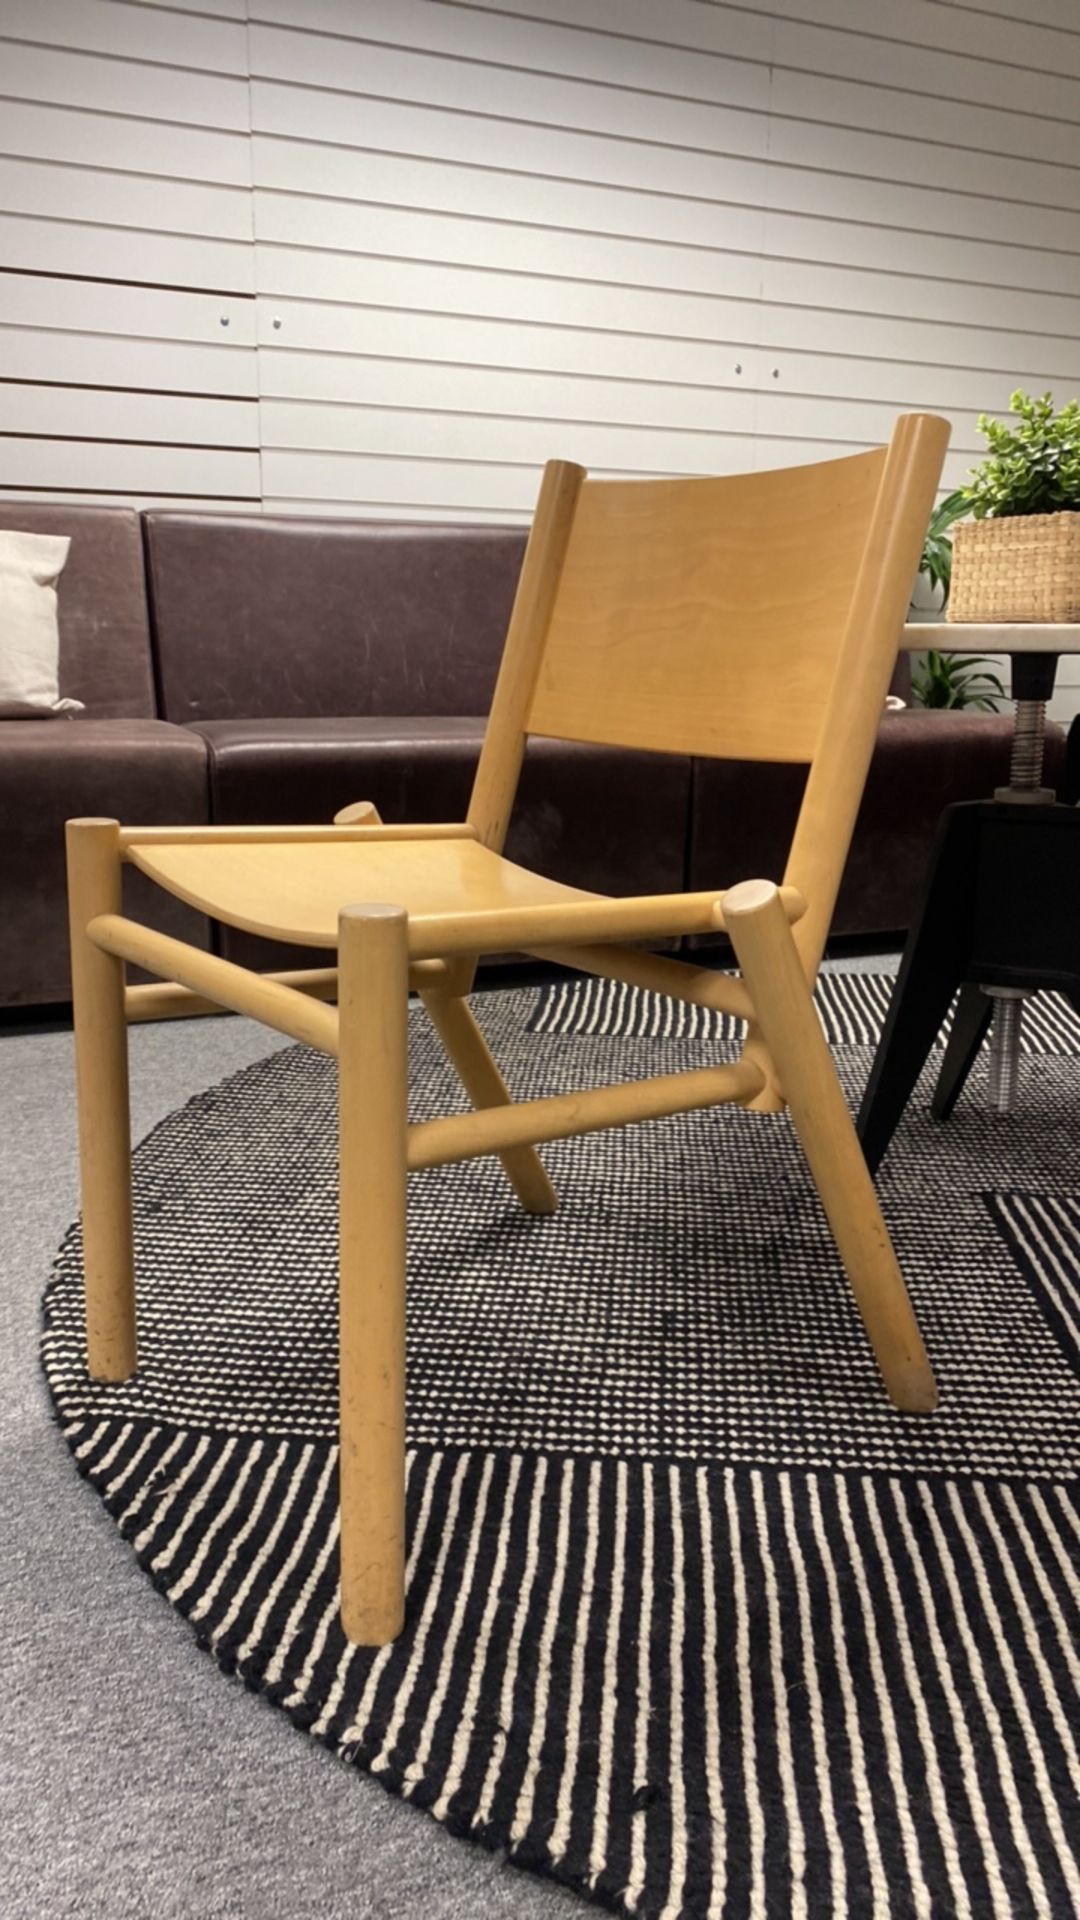 Tom Dixon Wooden Peg Chair X2 - Image 4 of 6